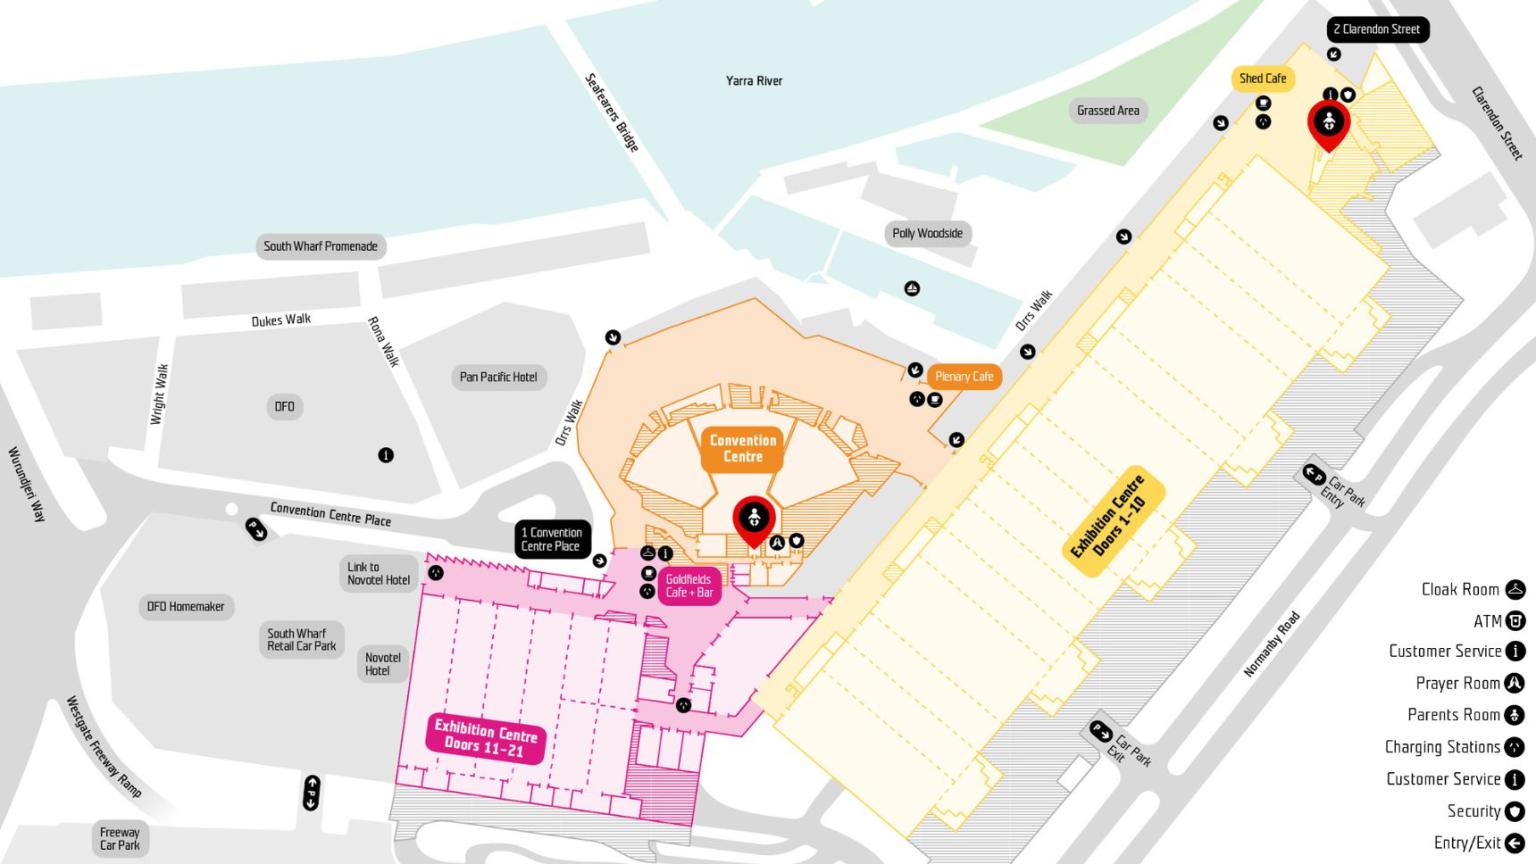 Floor plan of MCEC with a pin point highlighting the location of the parents rooms. 